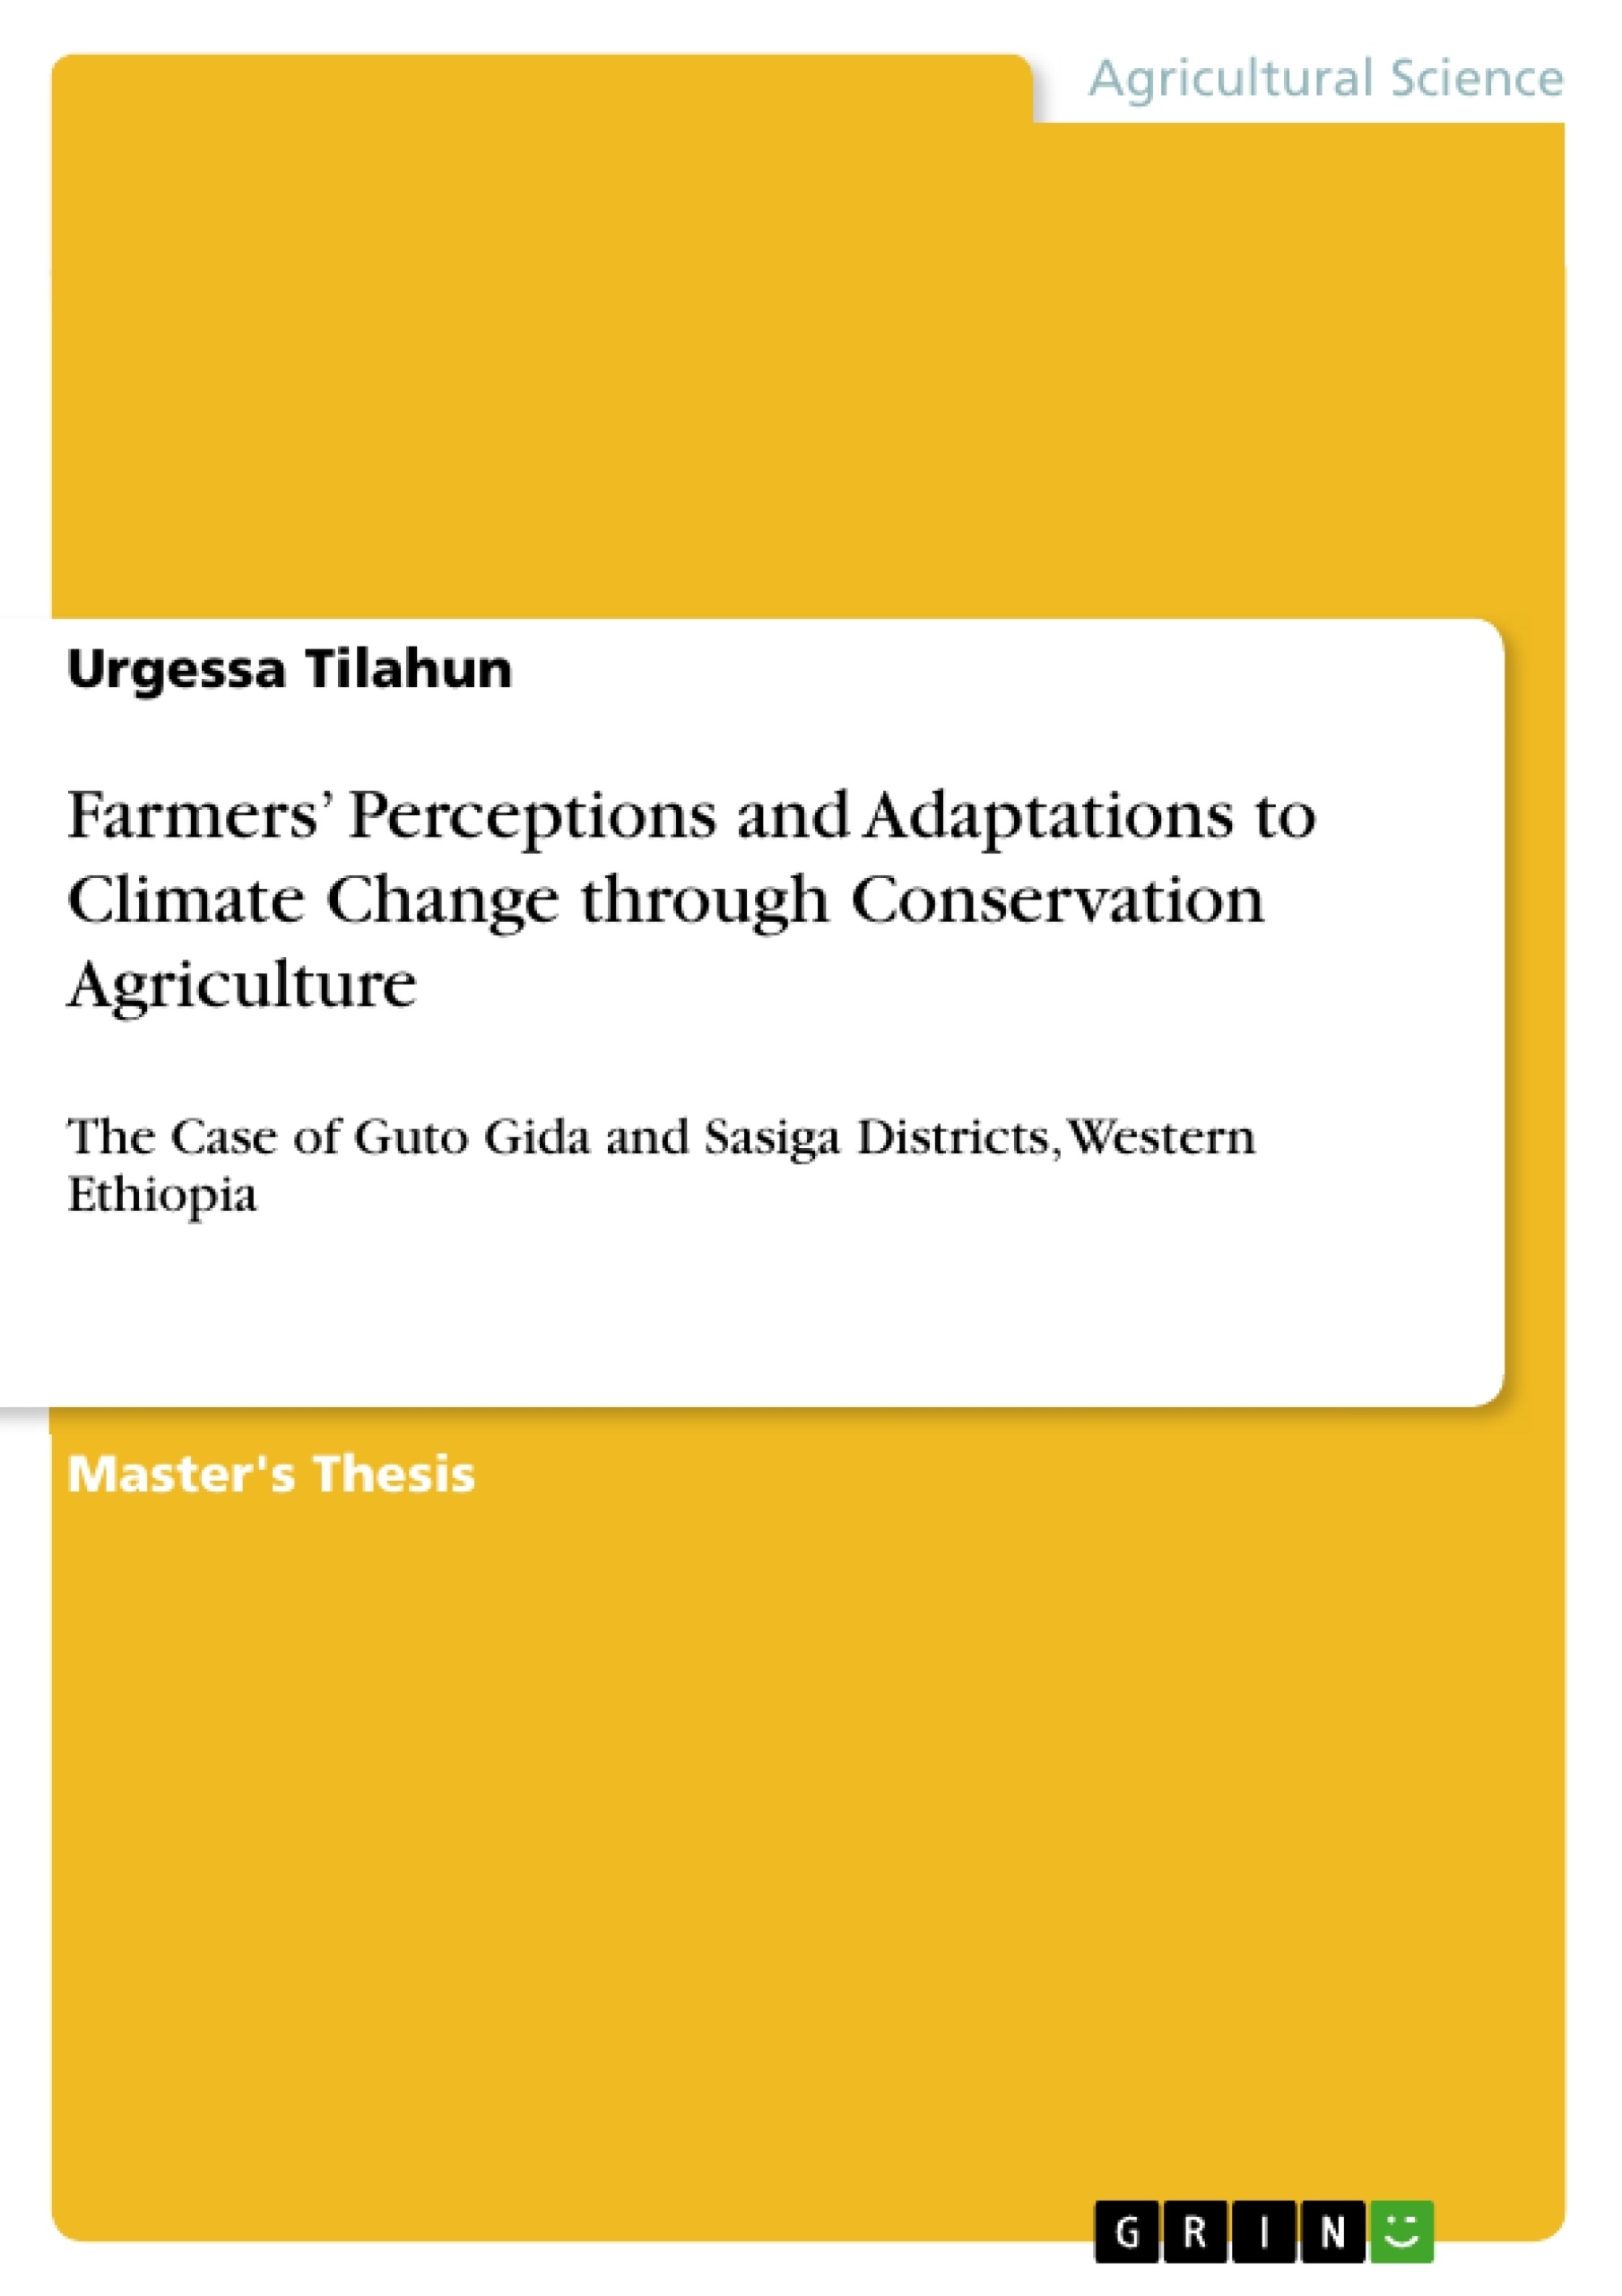 Título: Farmers’ Perceptions and Adaptations to Climate Change through Conservation Agriculture